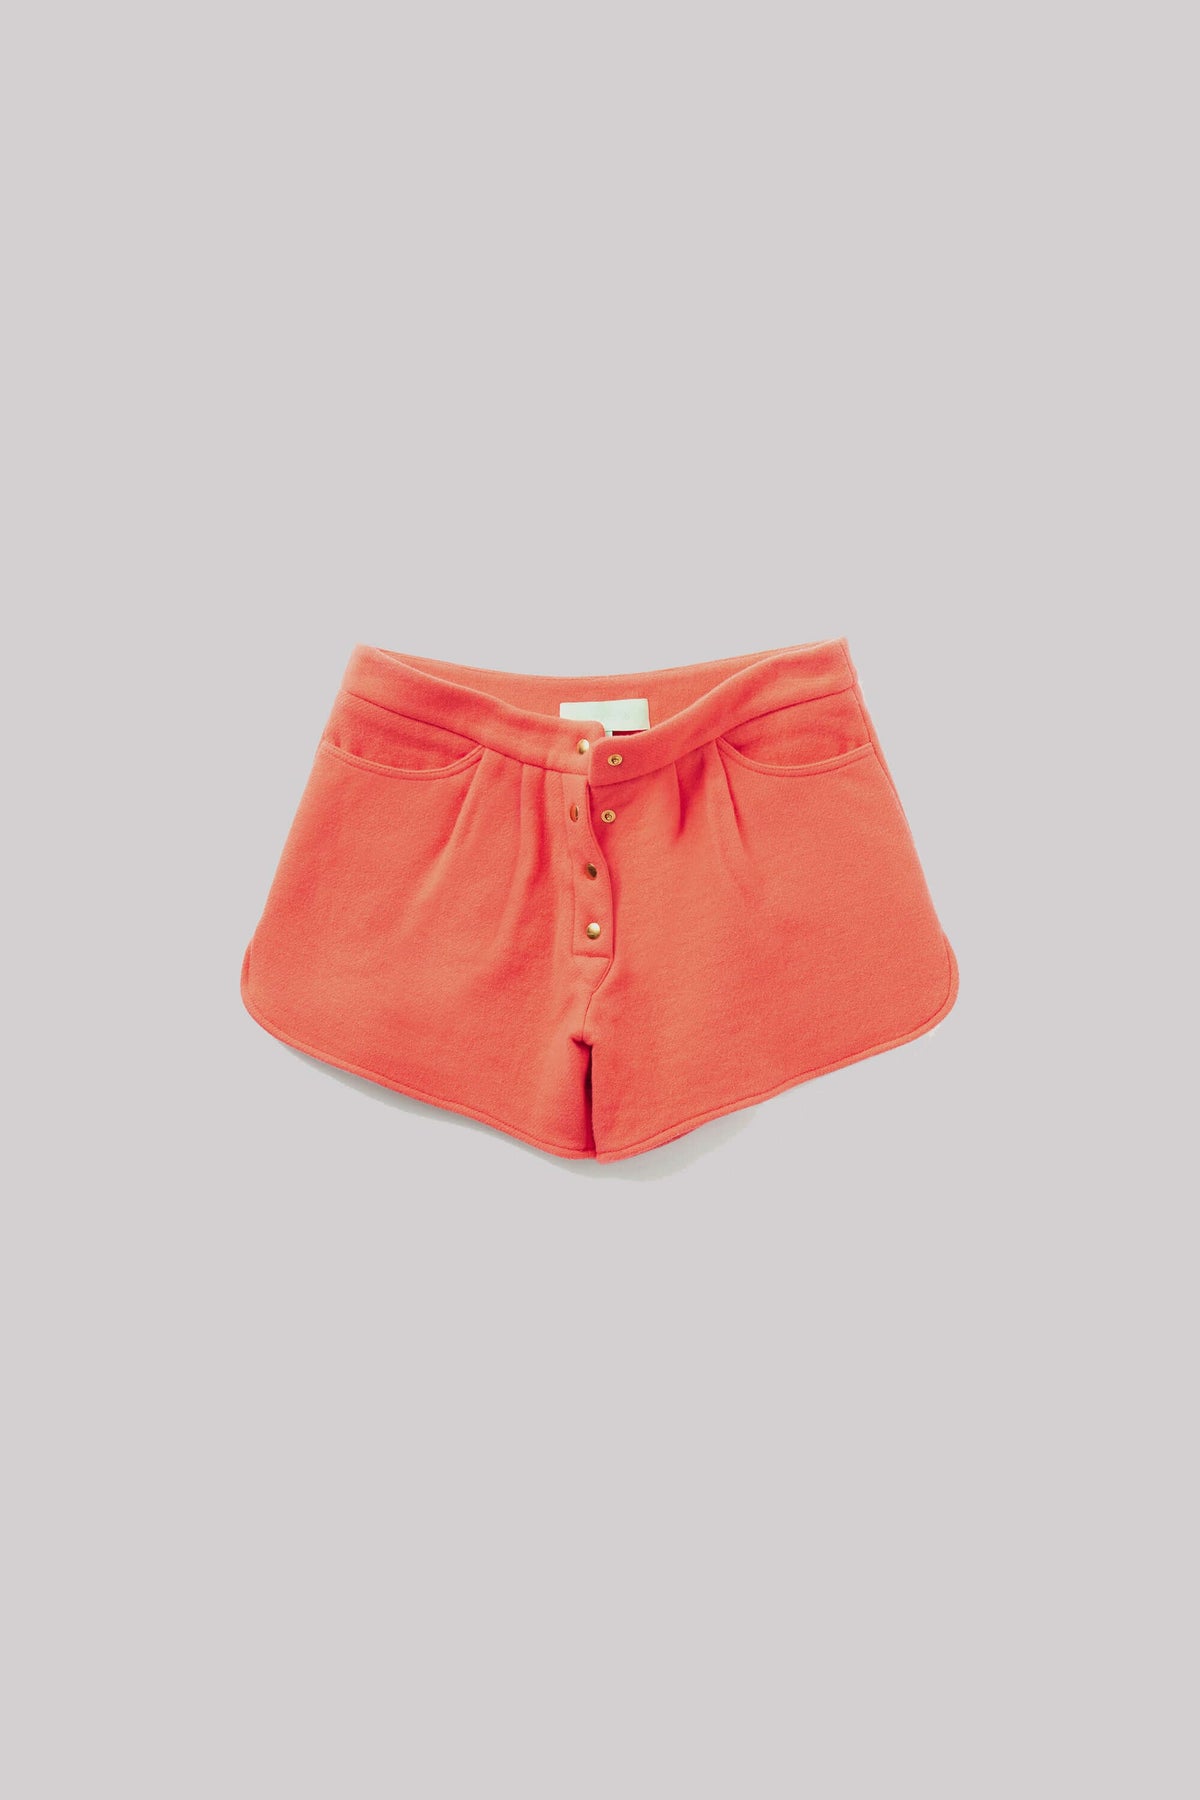 Spencer short in Reef orange woolen fabric and cashmere